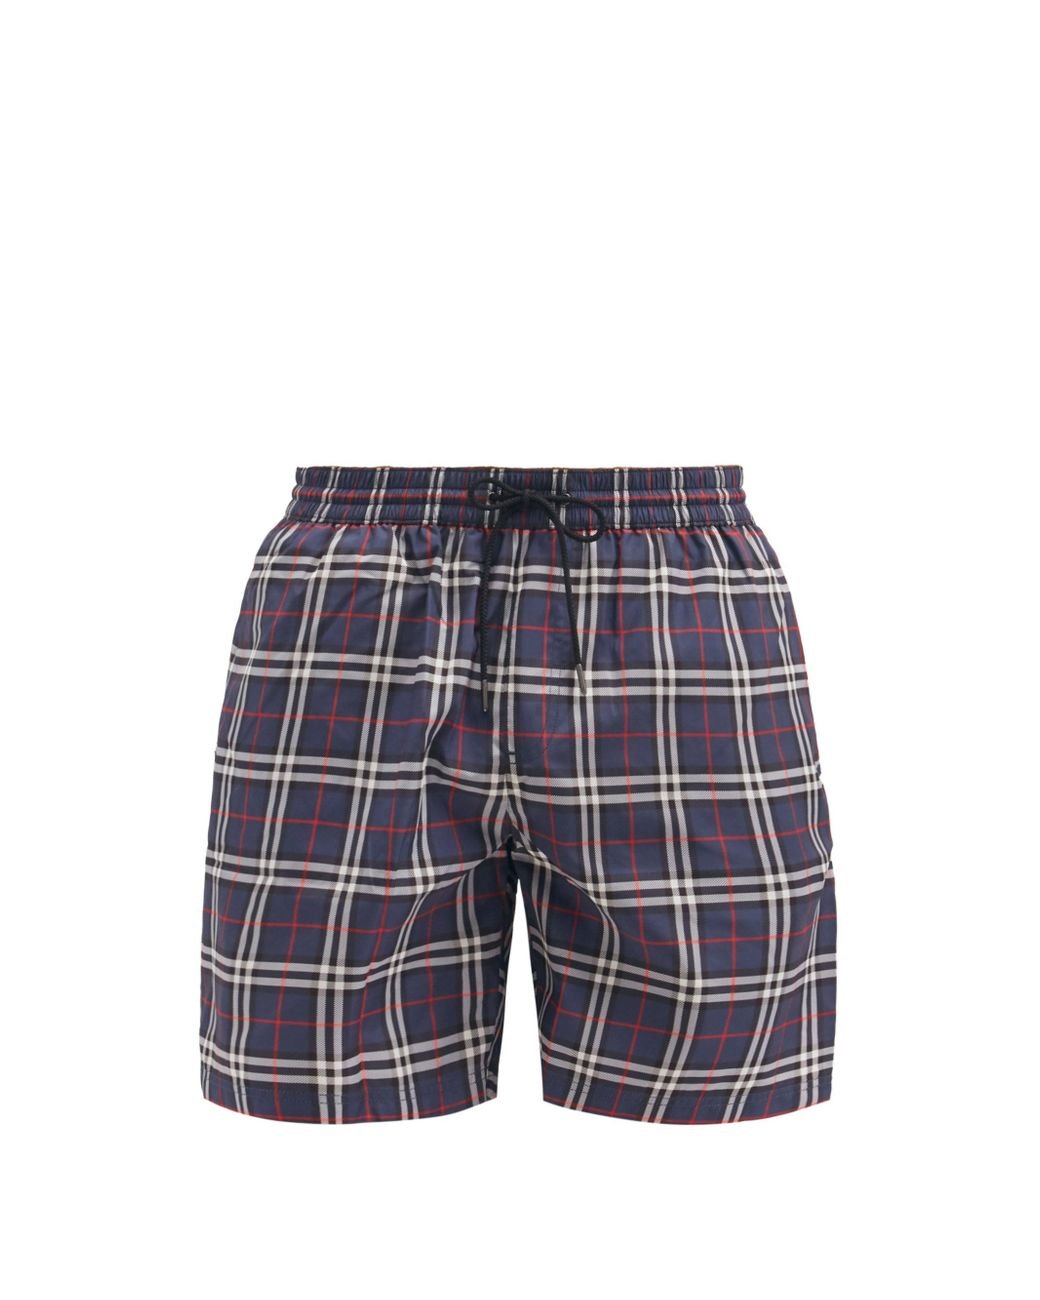 Burberry Guildes House-check Swim Shorts in Blue for Men - Lyst